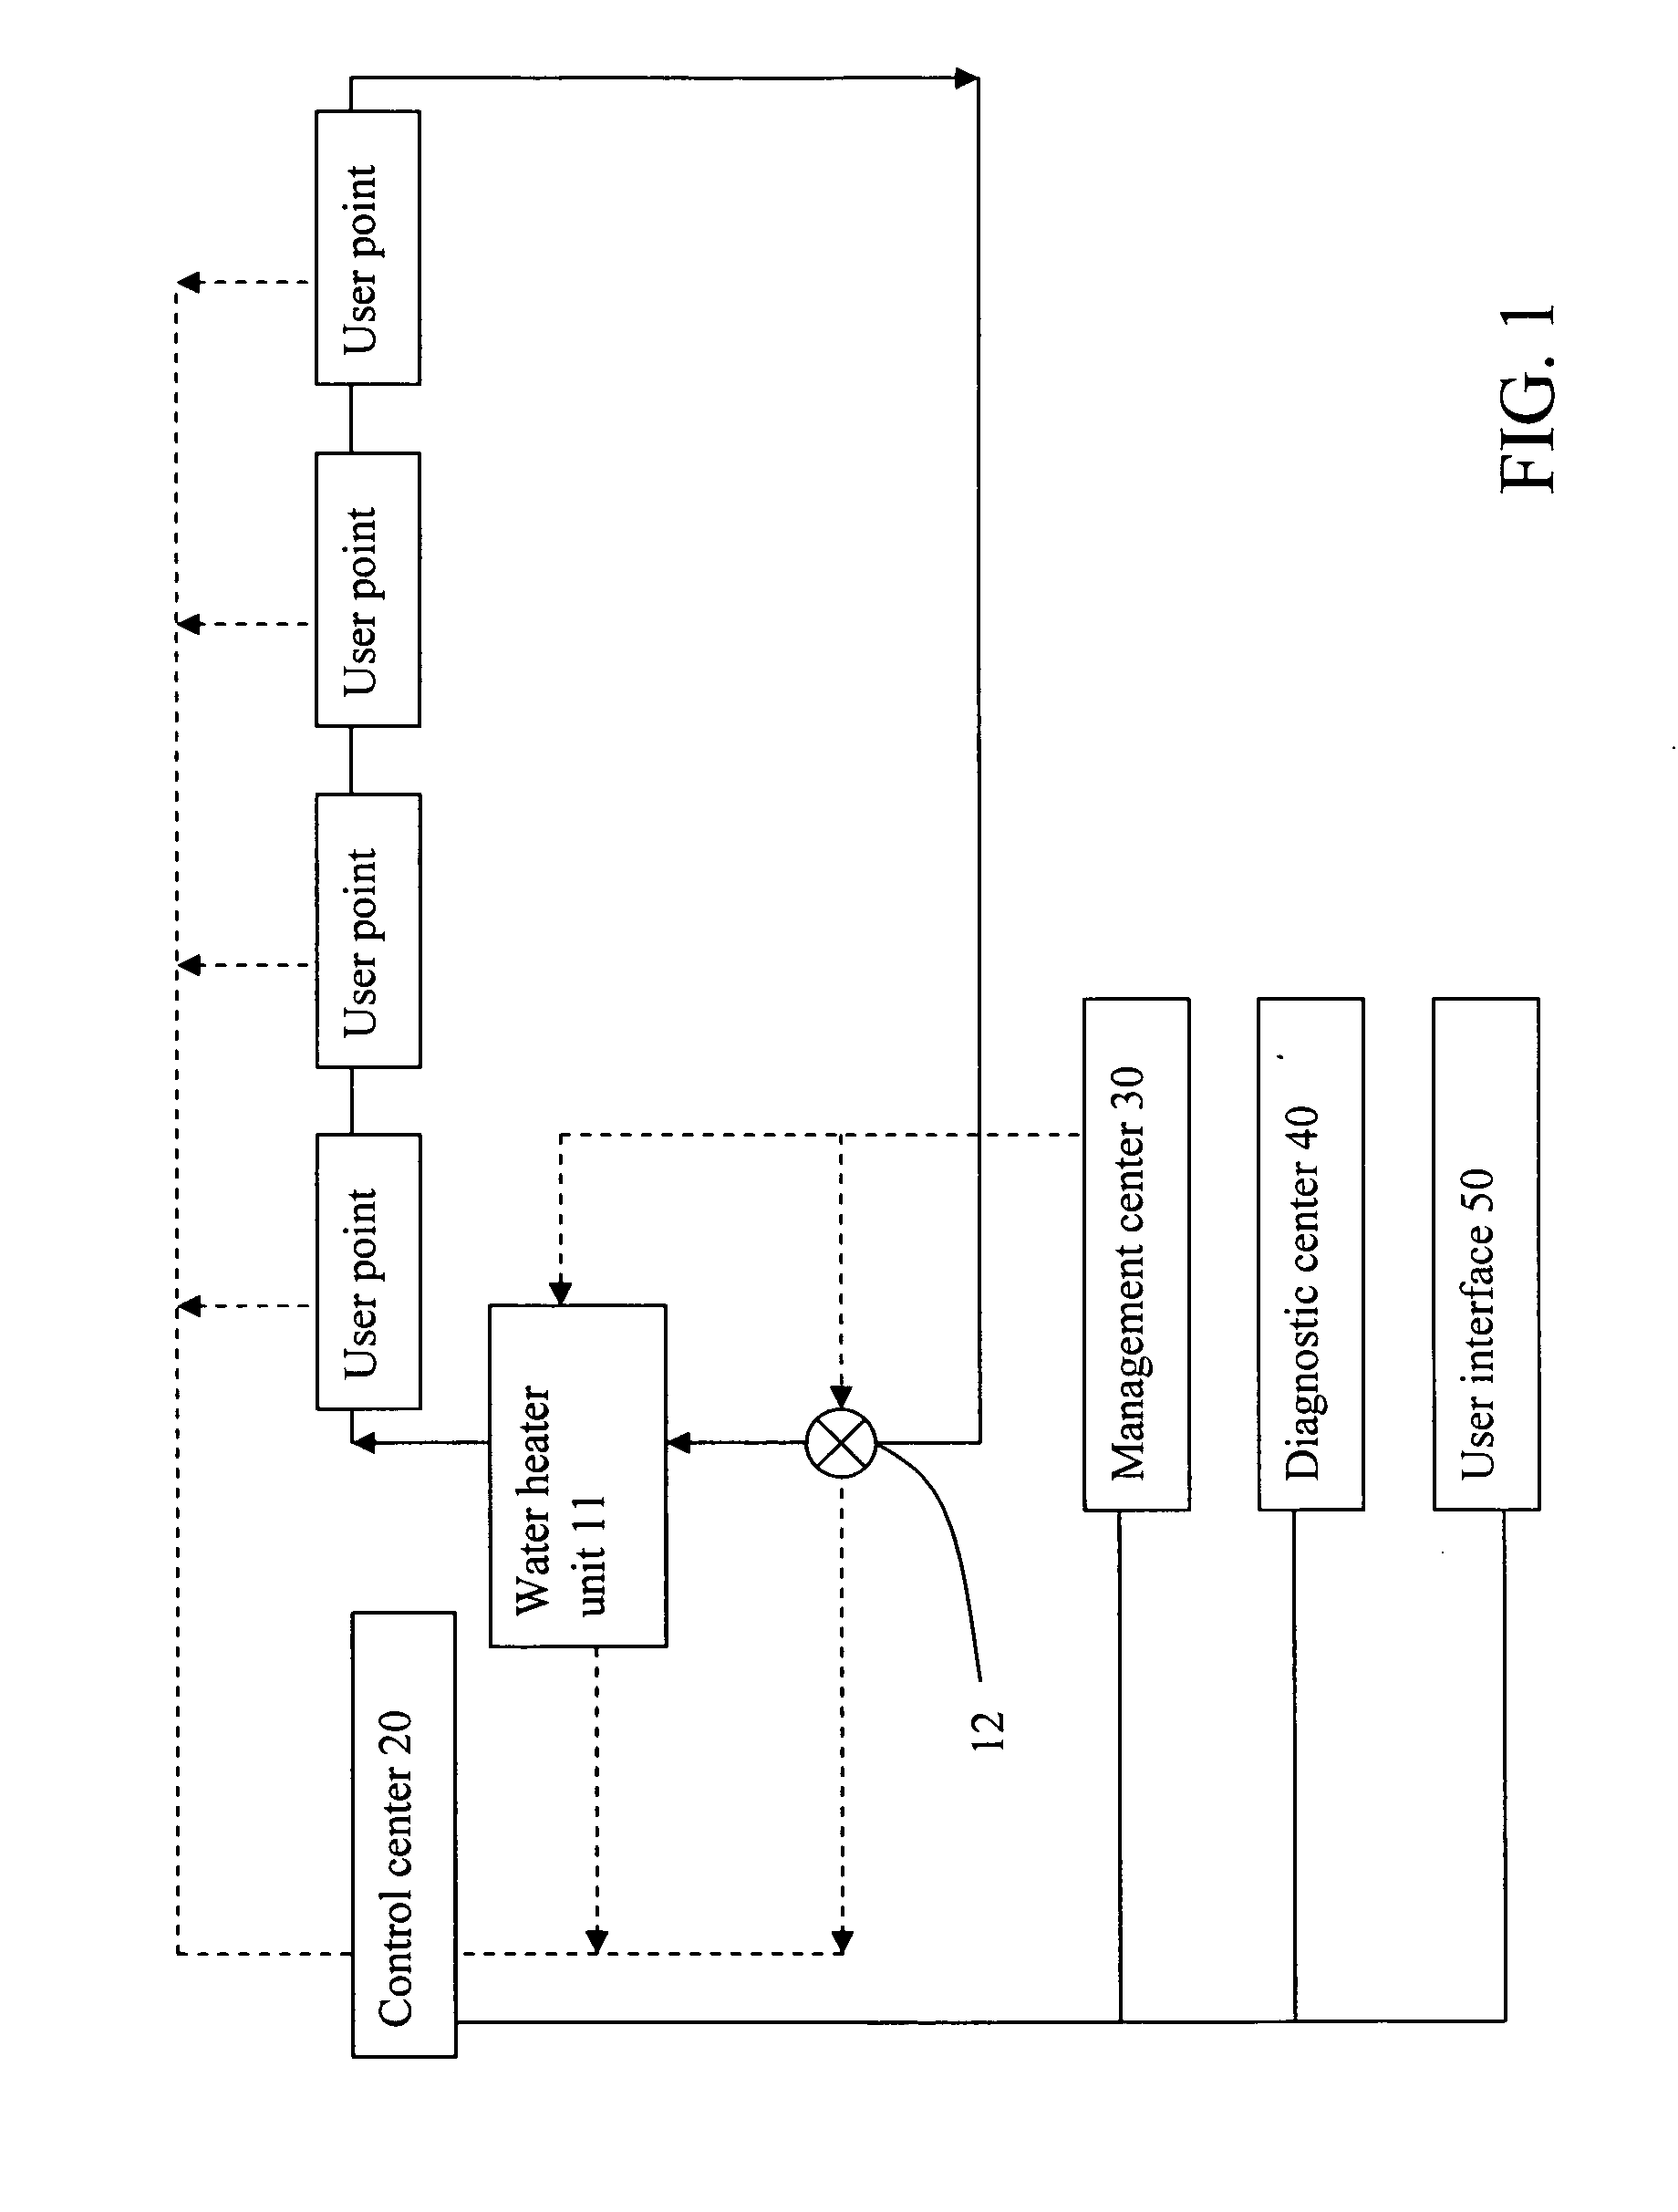 Energy management system and method for water heater system